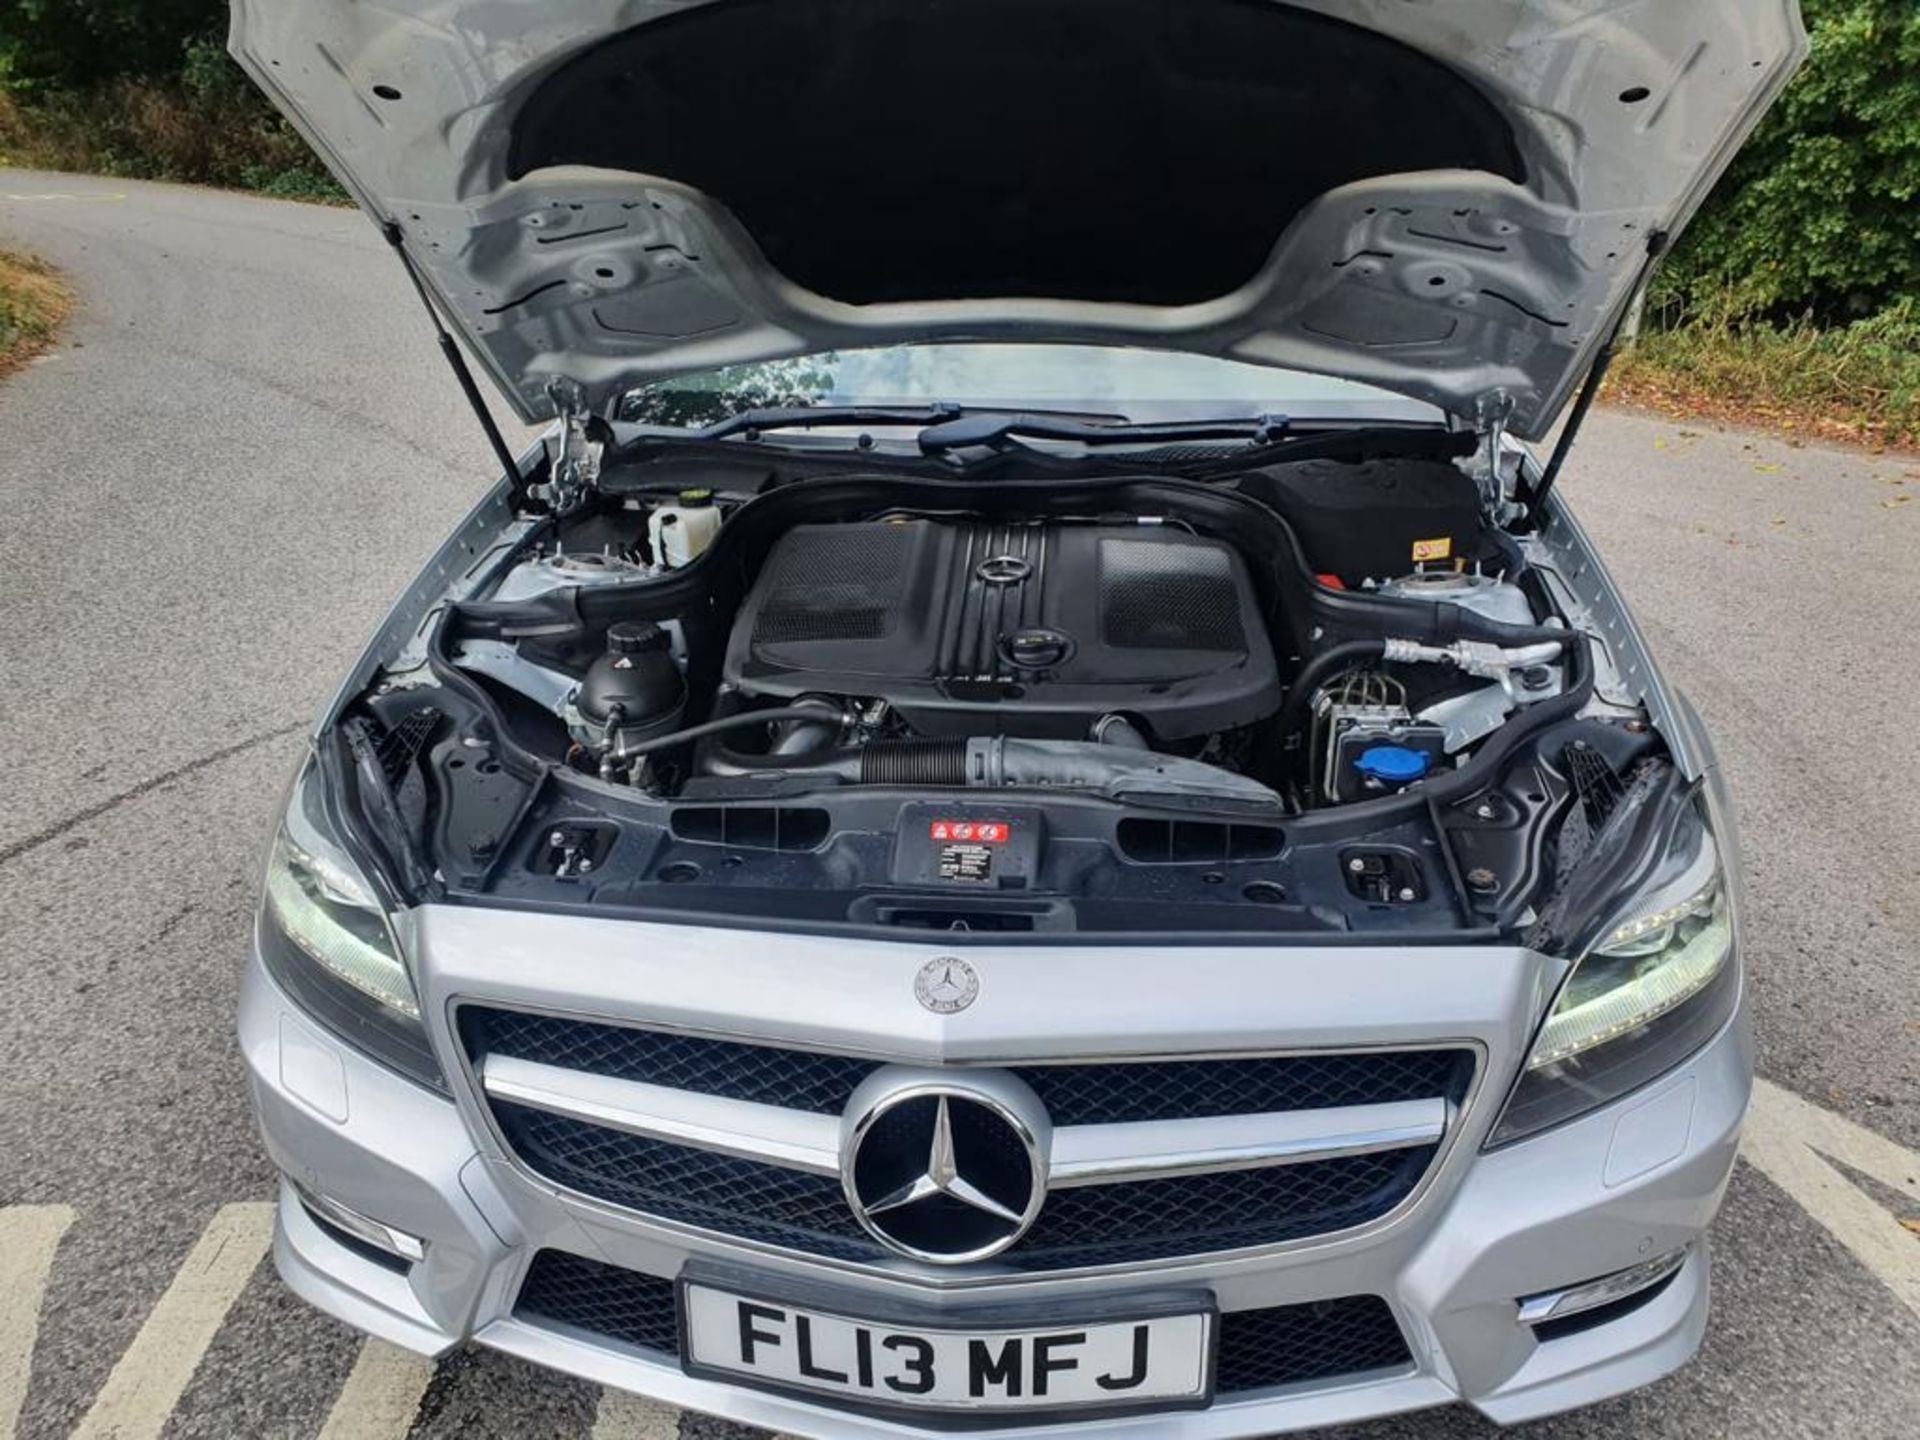 2013 MERCEDES-BENZ CLS250 CDI AMG BLUE-CY SPORT SILVER COUPE, 2.2 DIESEL, 45,952 MILES *NO VAT* - Image 11 of 34